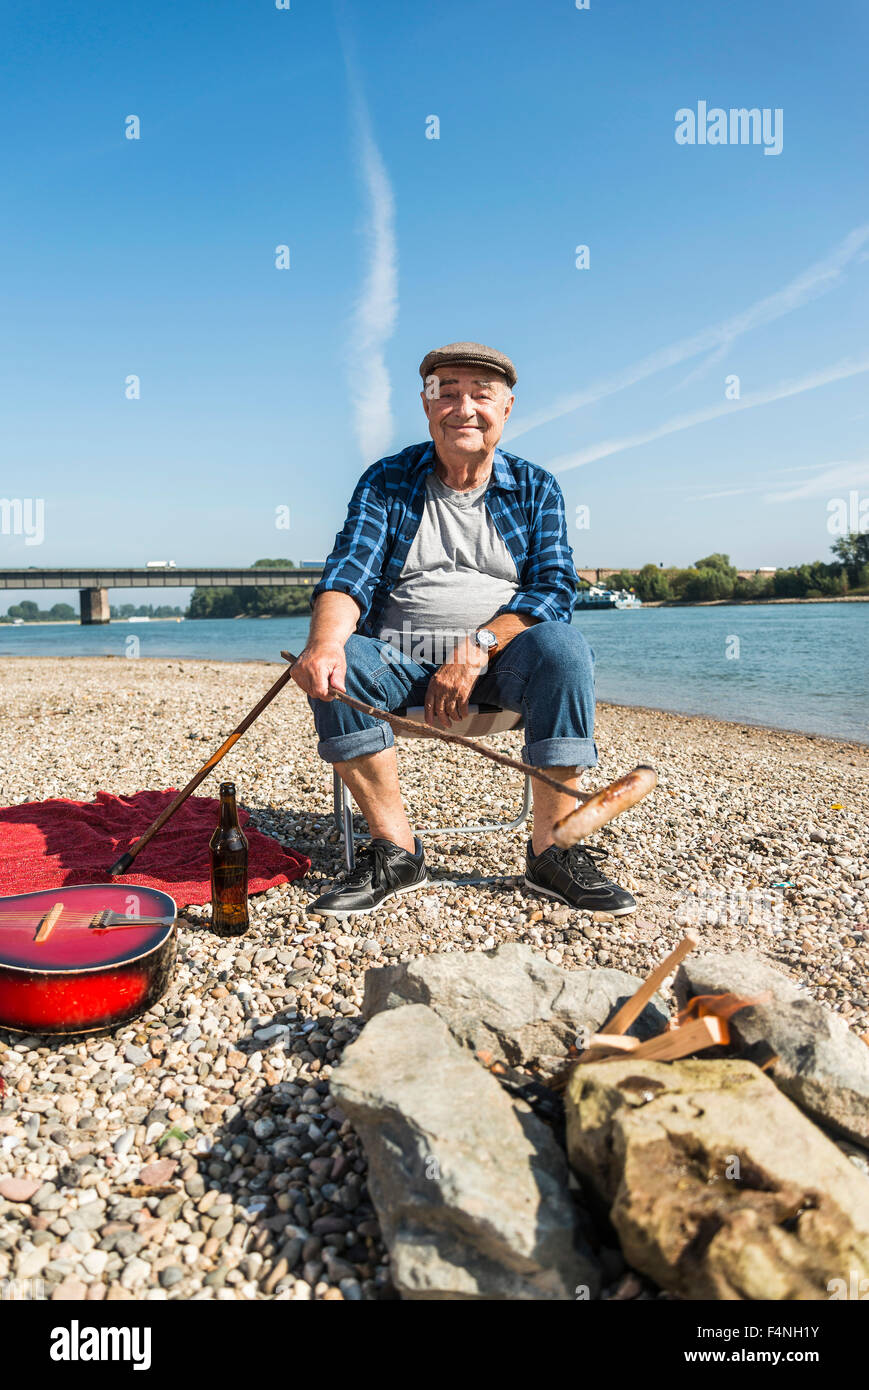 Germany, Ludwigshafen, portrait of smiling senior man barbecueing sausage on the beach Stock Photo